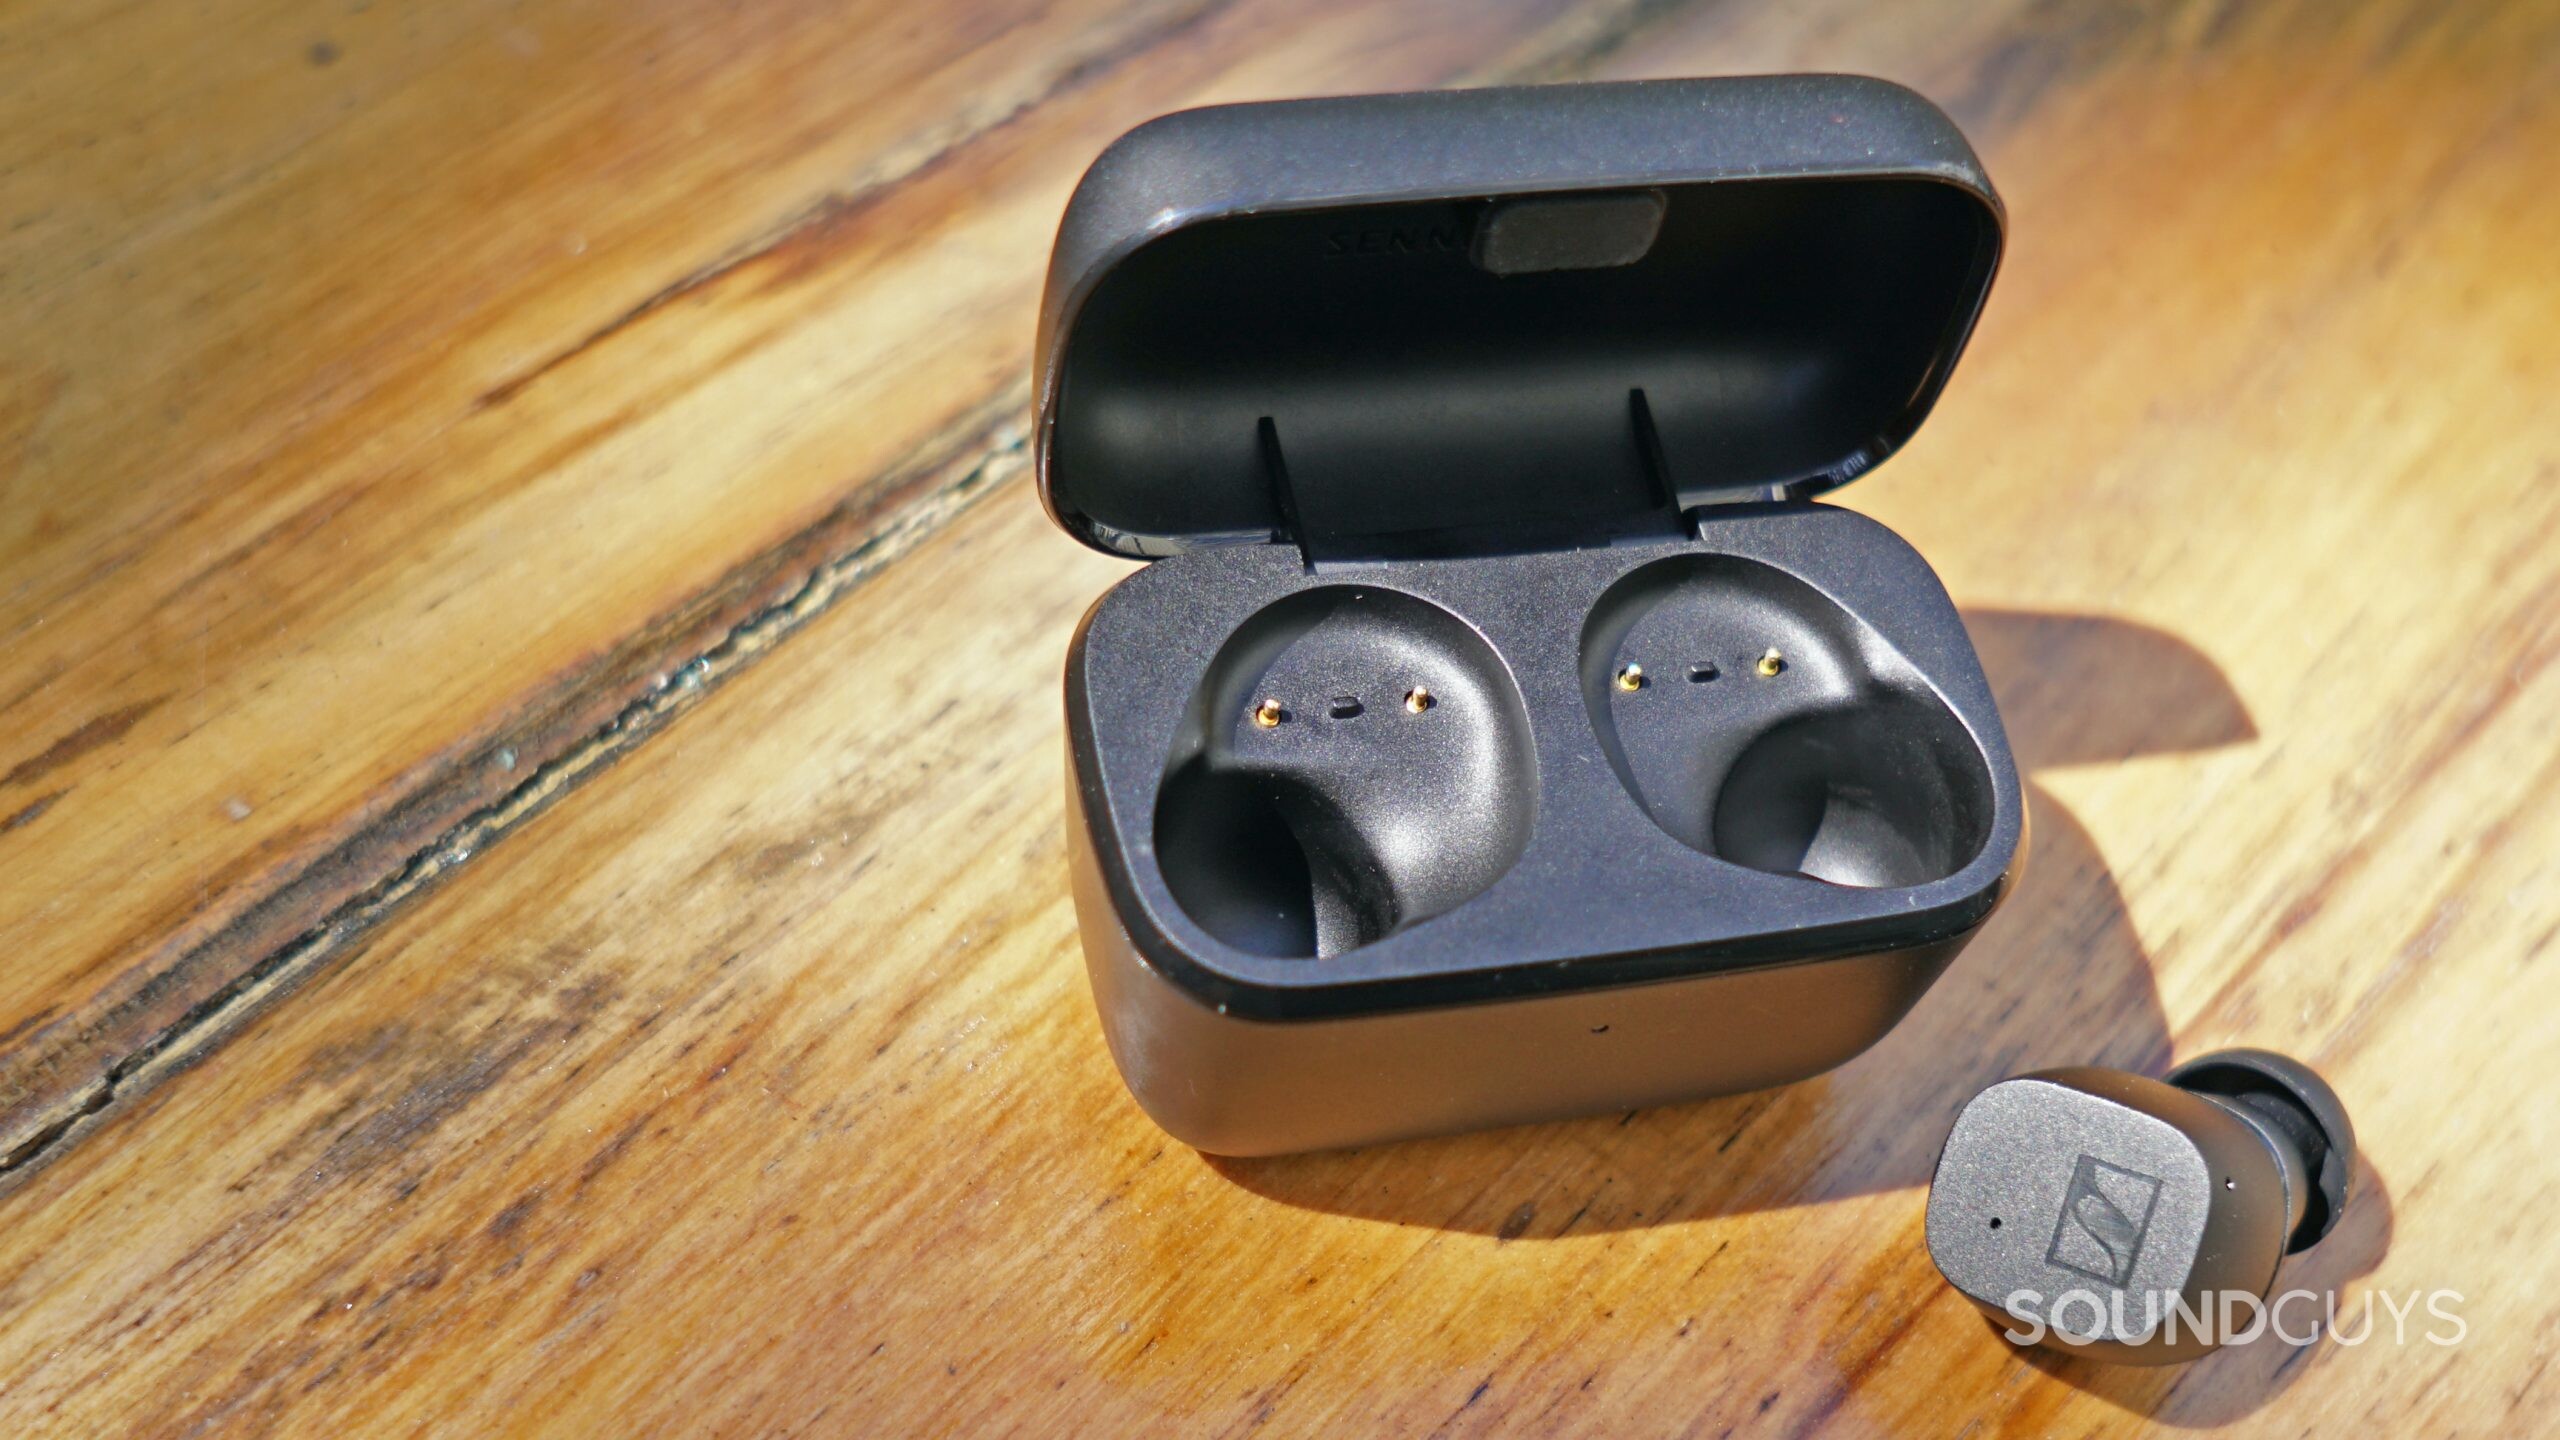 One Sennheiser CX True Wireless earbud sits on a wooden table next to its open charging case.